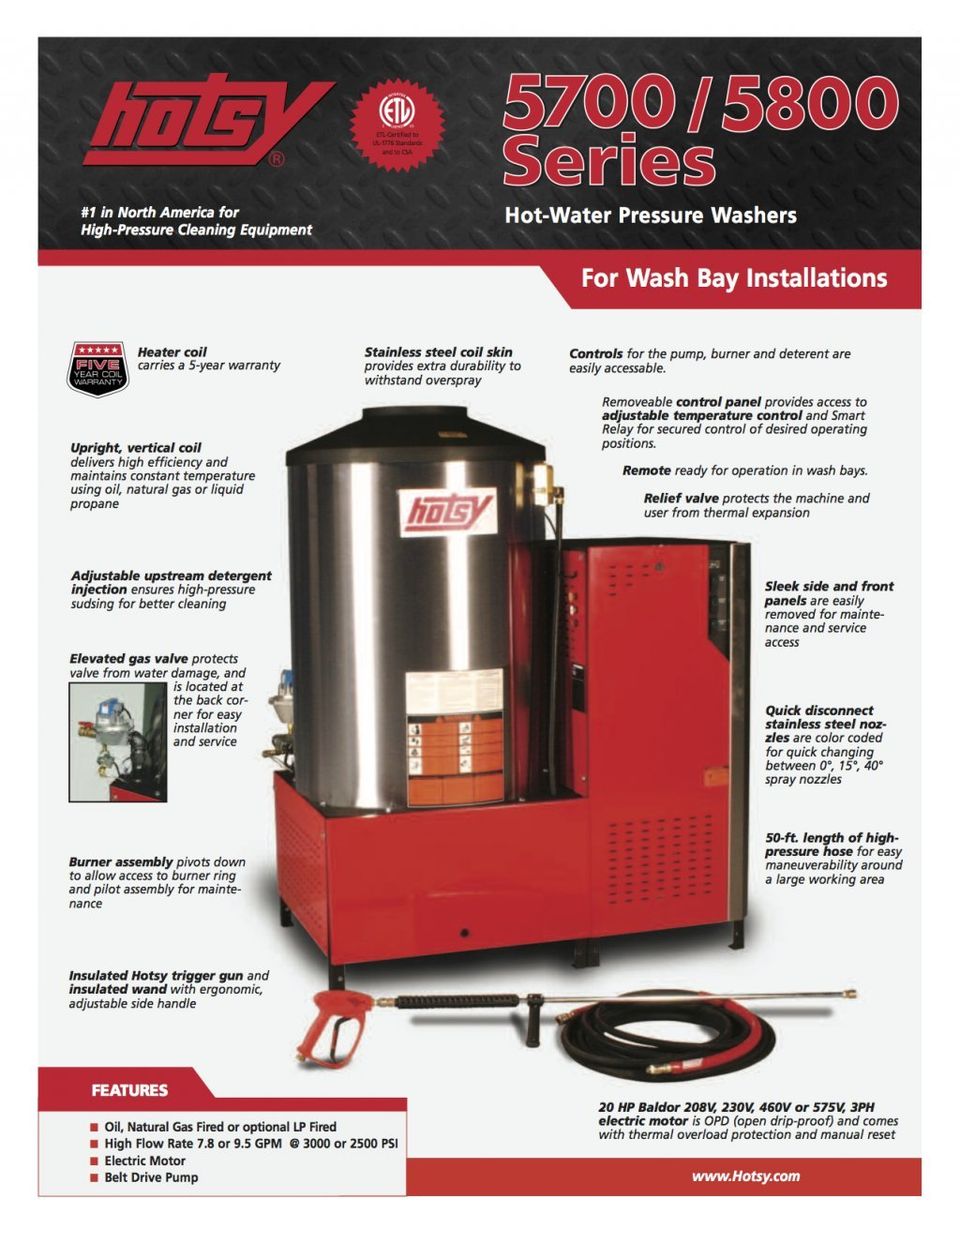 Hotsy Hot Water Pressure Washer 5700/ 5800 Series Product Sheet -- Page 1